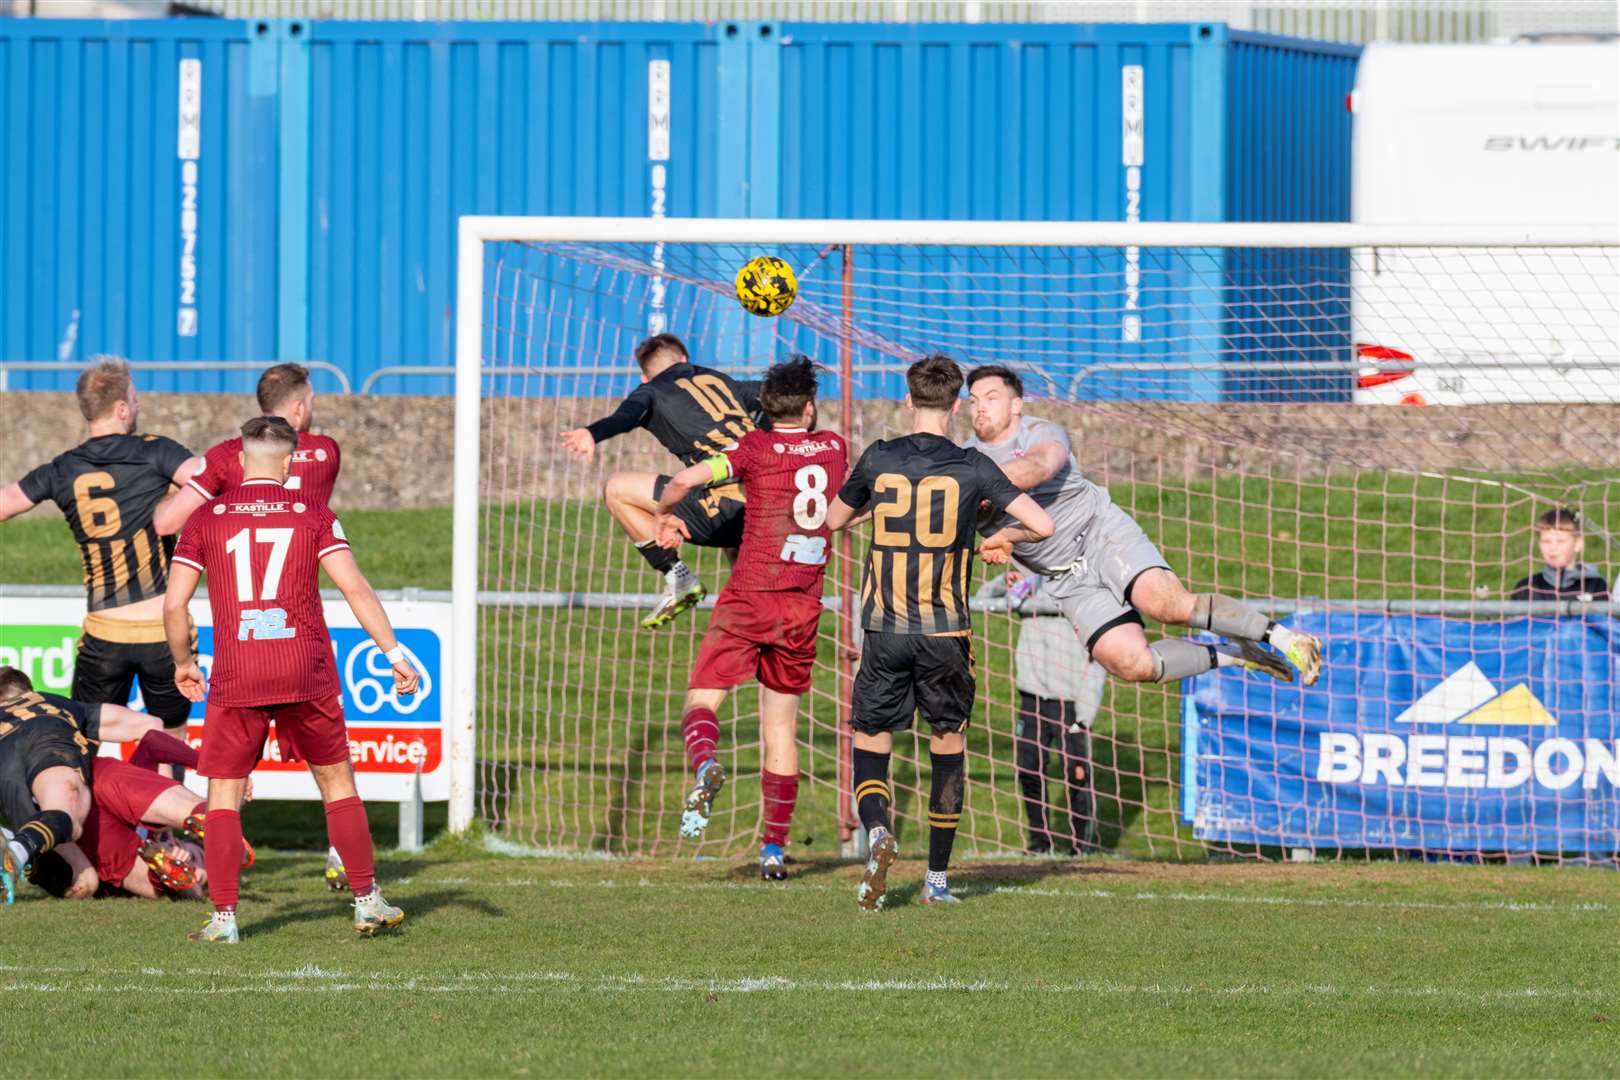 Huntly's Angus Grant makes a close attempt for goal.Keith F.C (1) v Huntly F.C (0) at Kynoch Park, Keith. Highland Football League.Picture: Beth Taylor